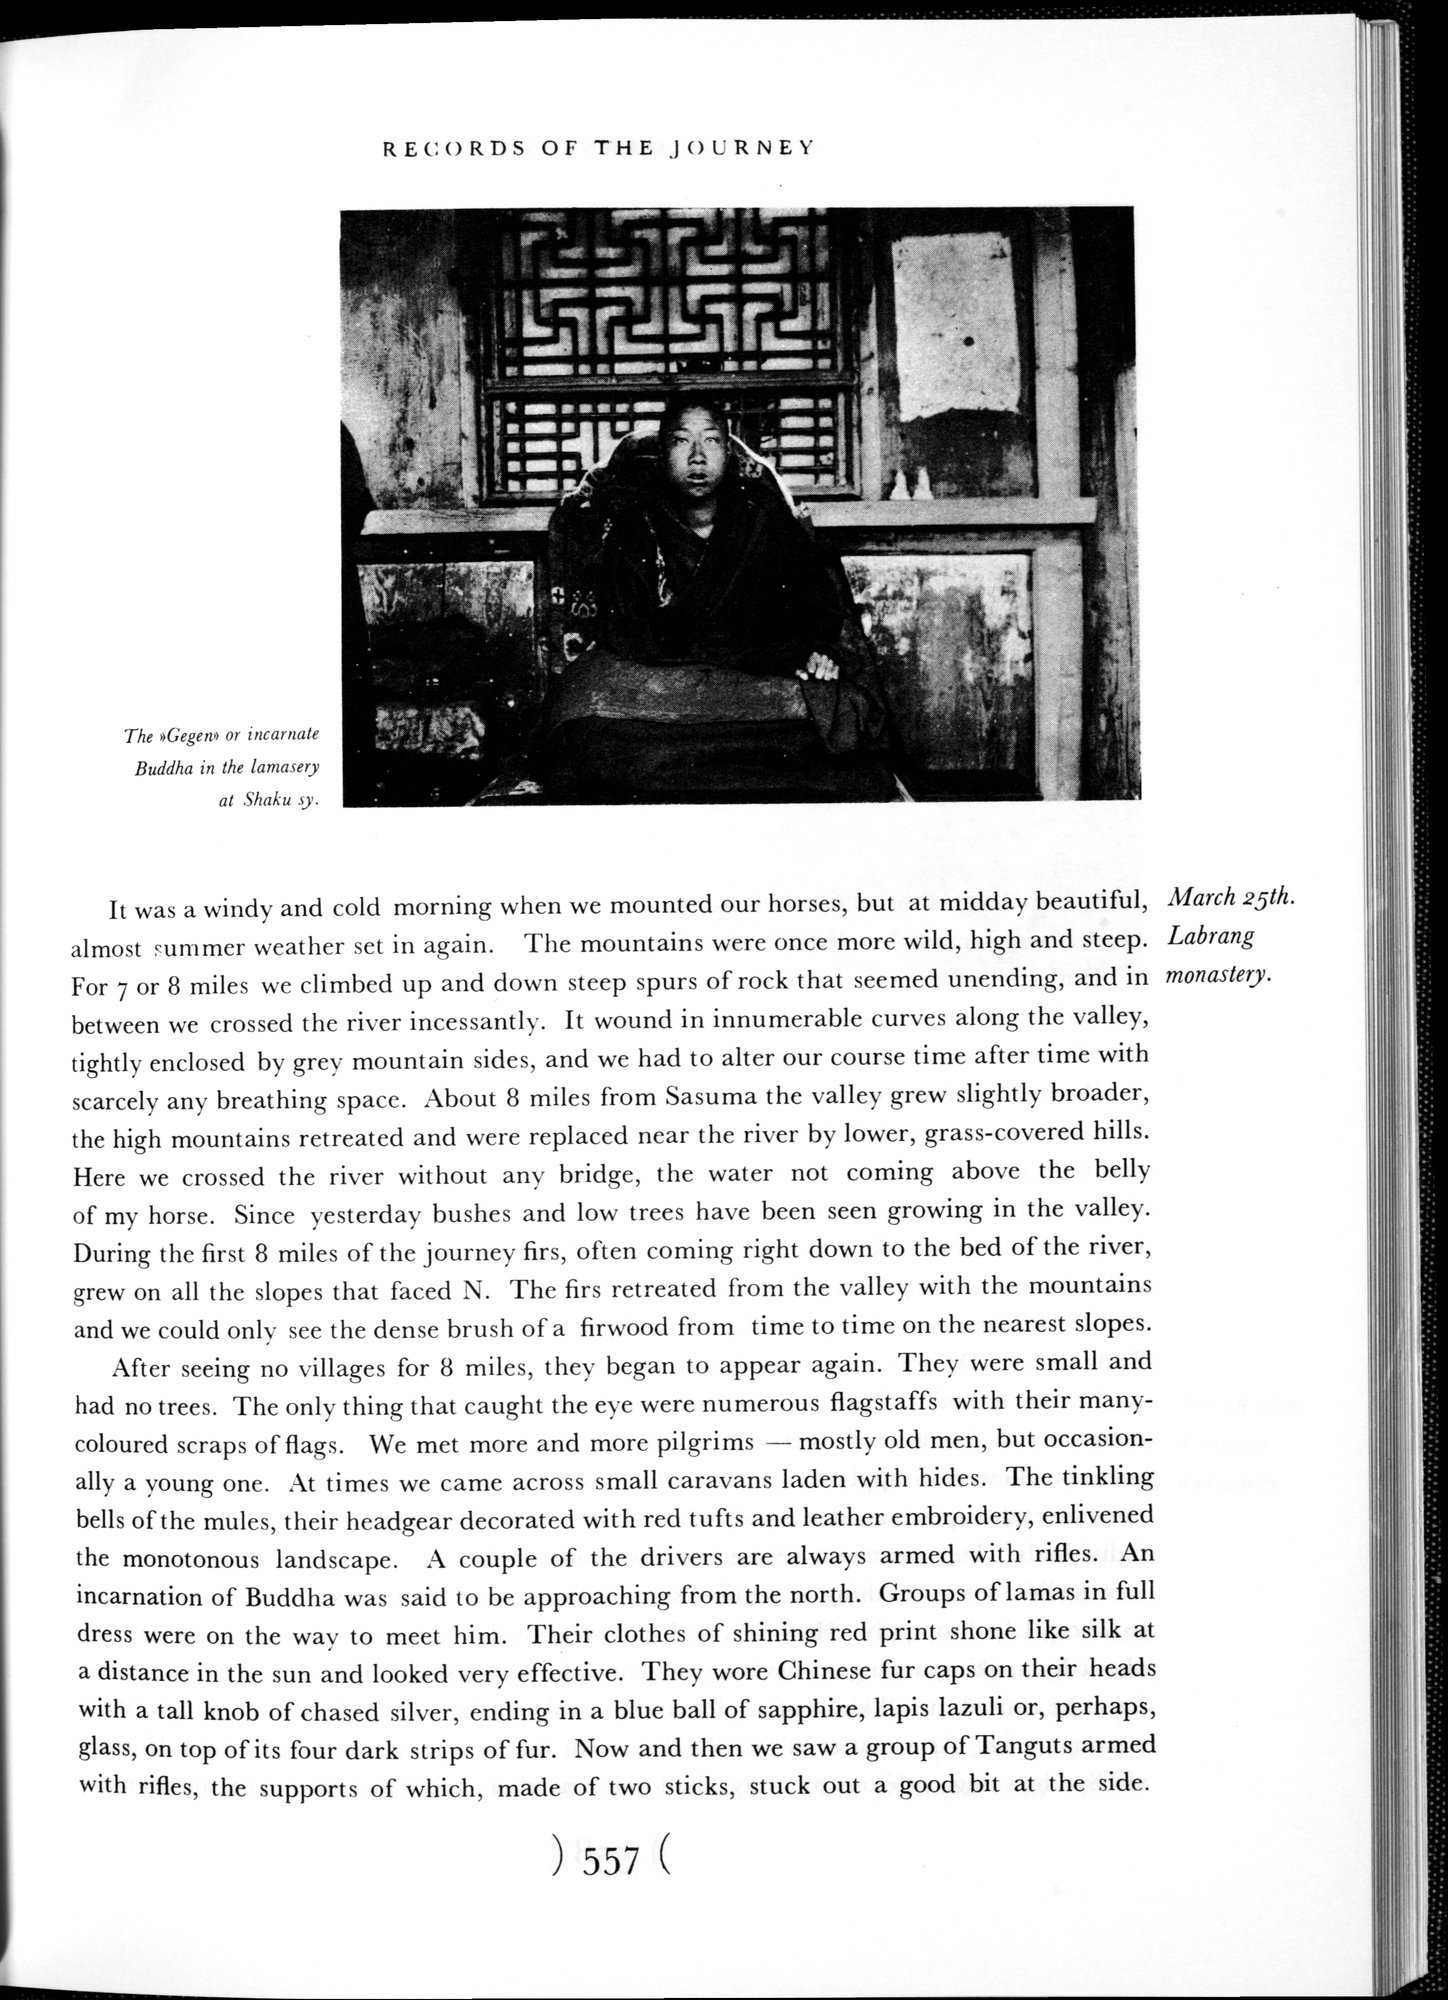 Across Asia : vol.1 / Page 563 (Grayscale High Resolution Image)